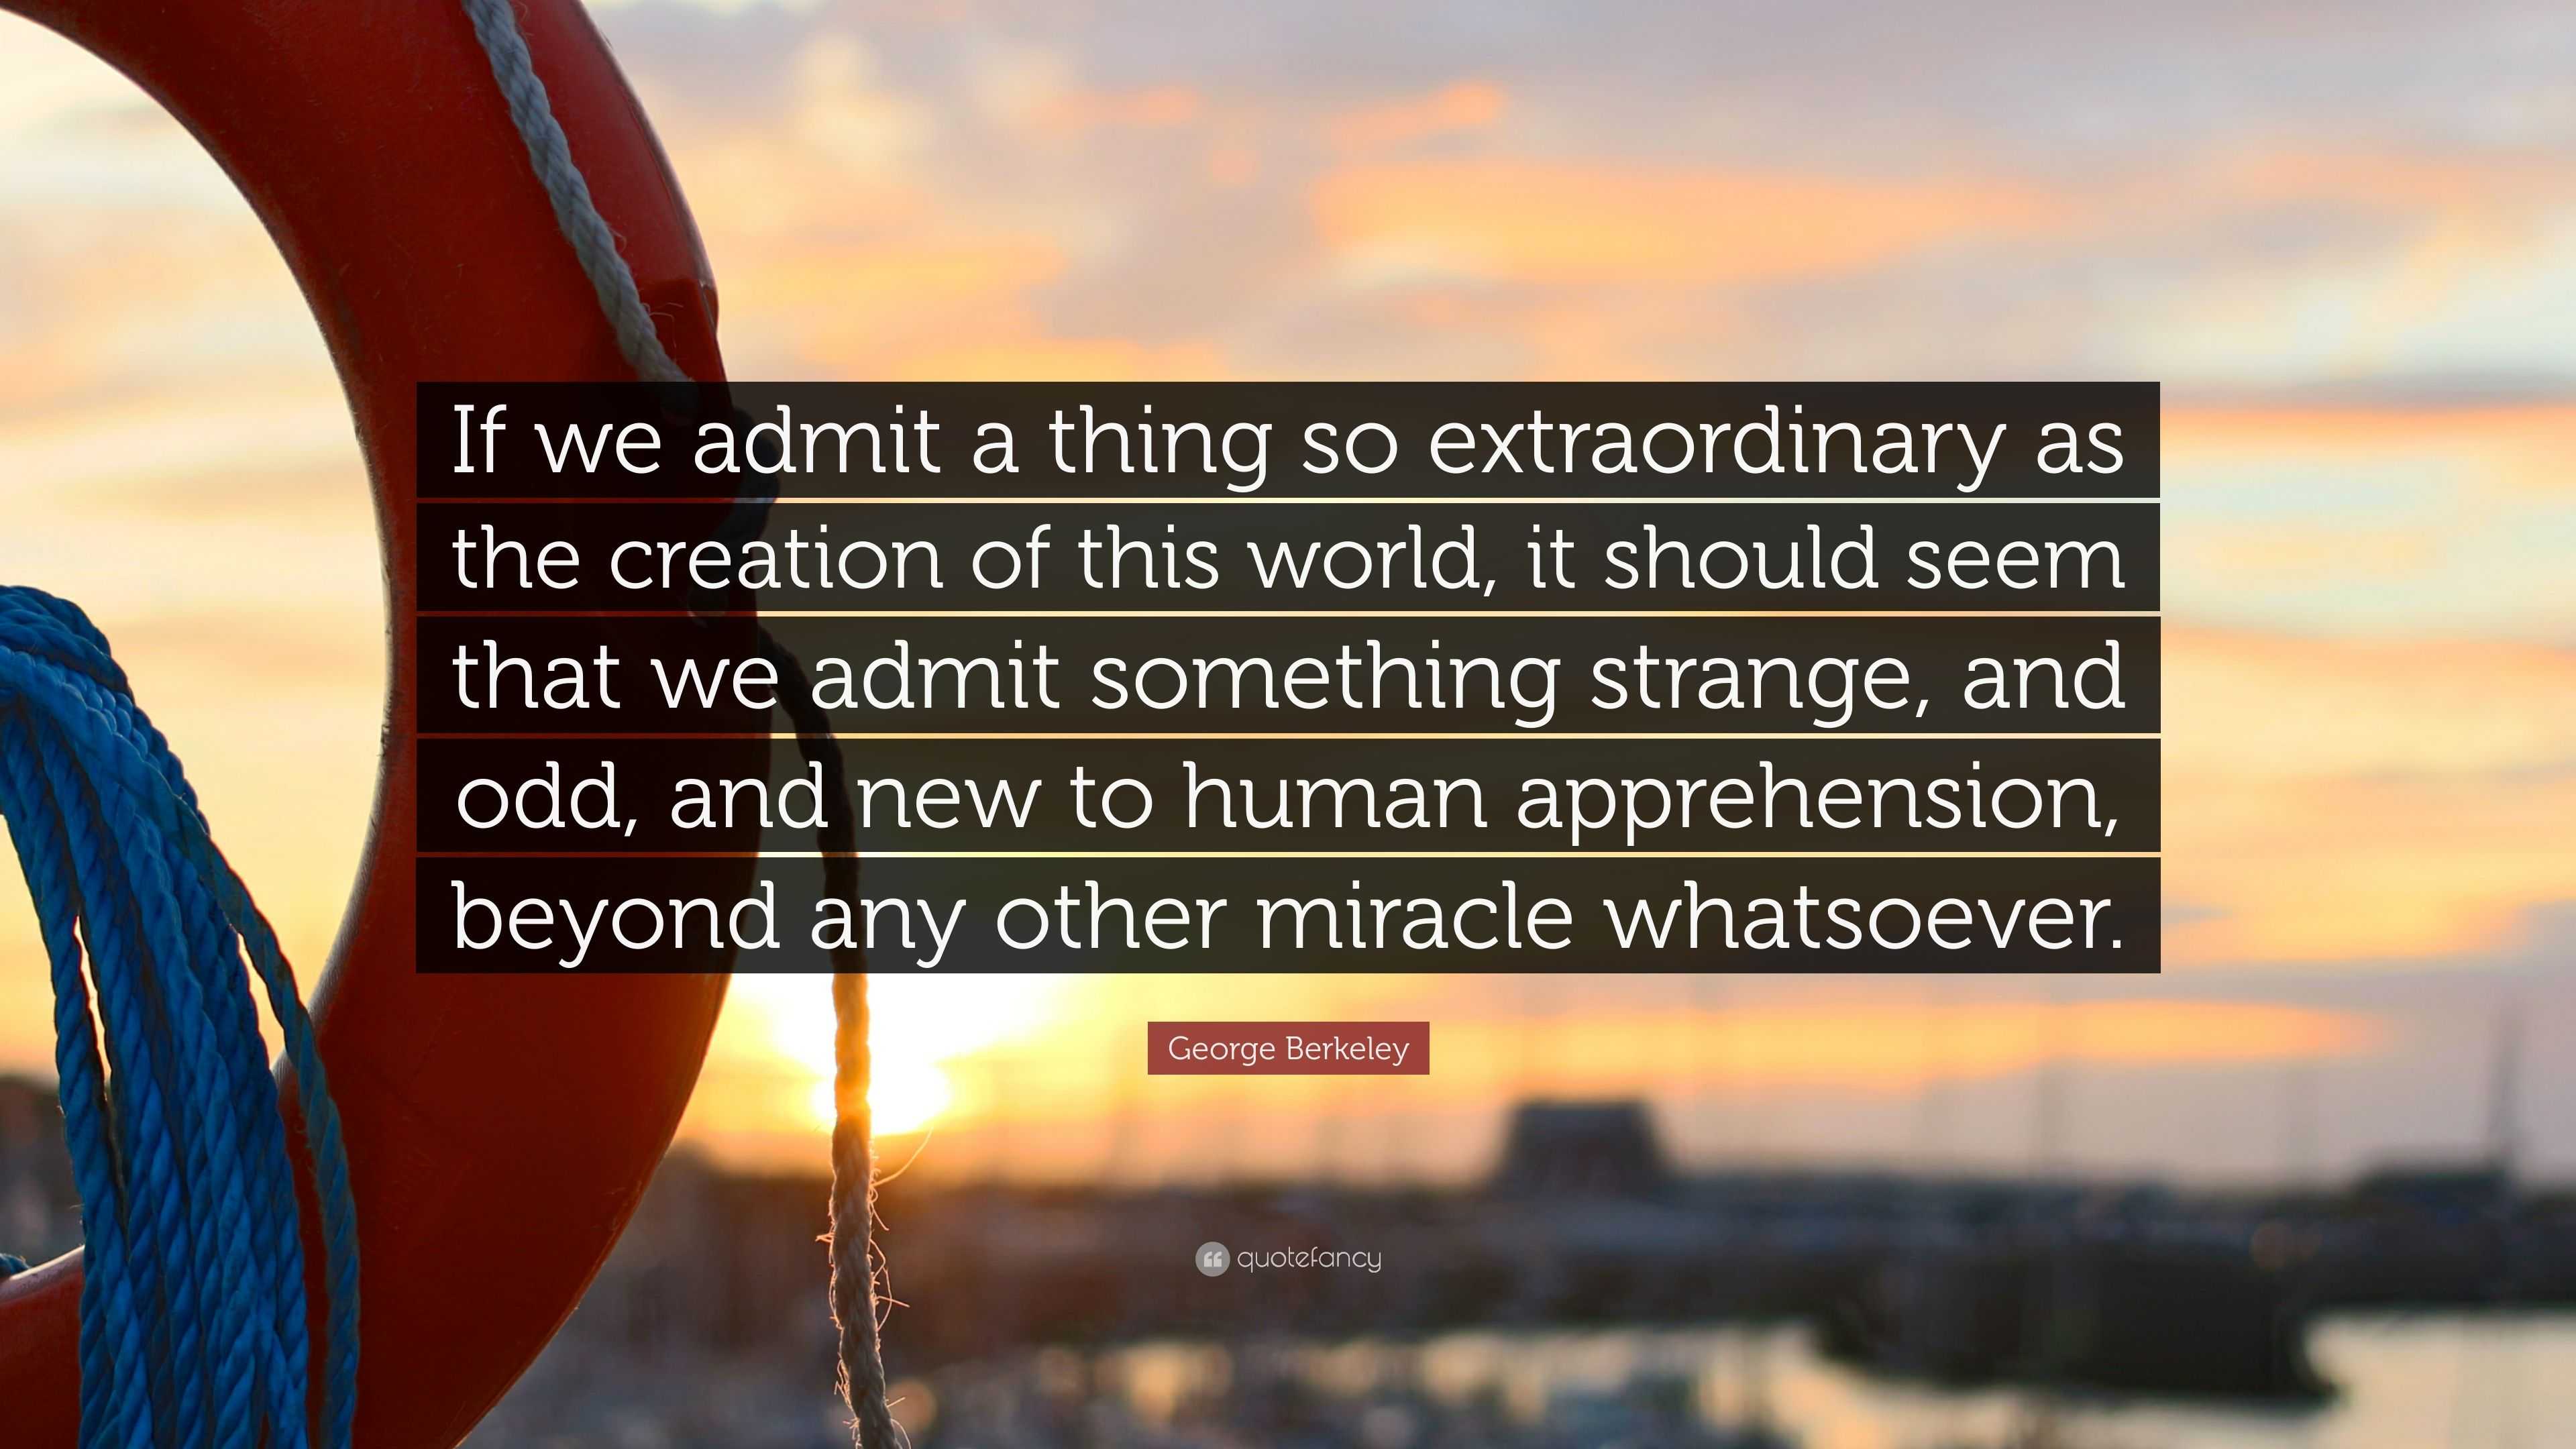 George Berkeley Quote: “If we admit a thing so extraordinary as the ...